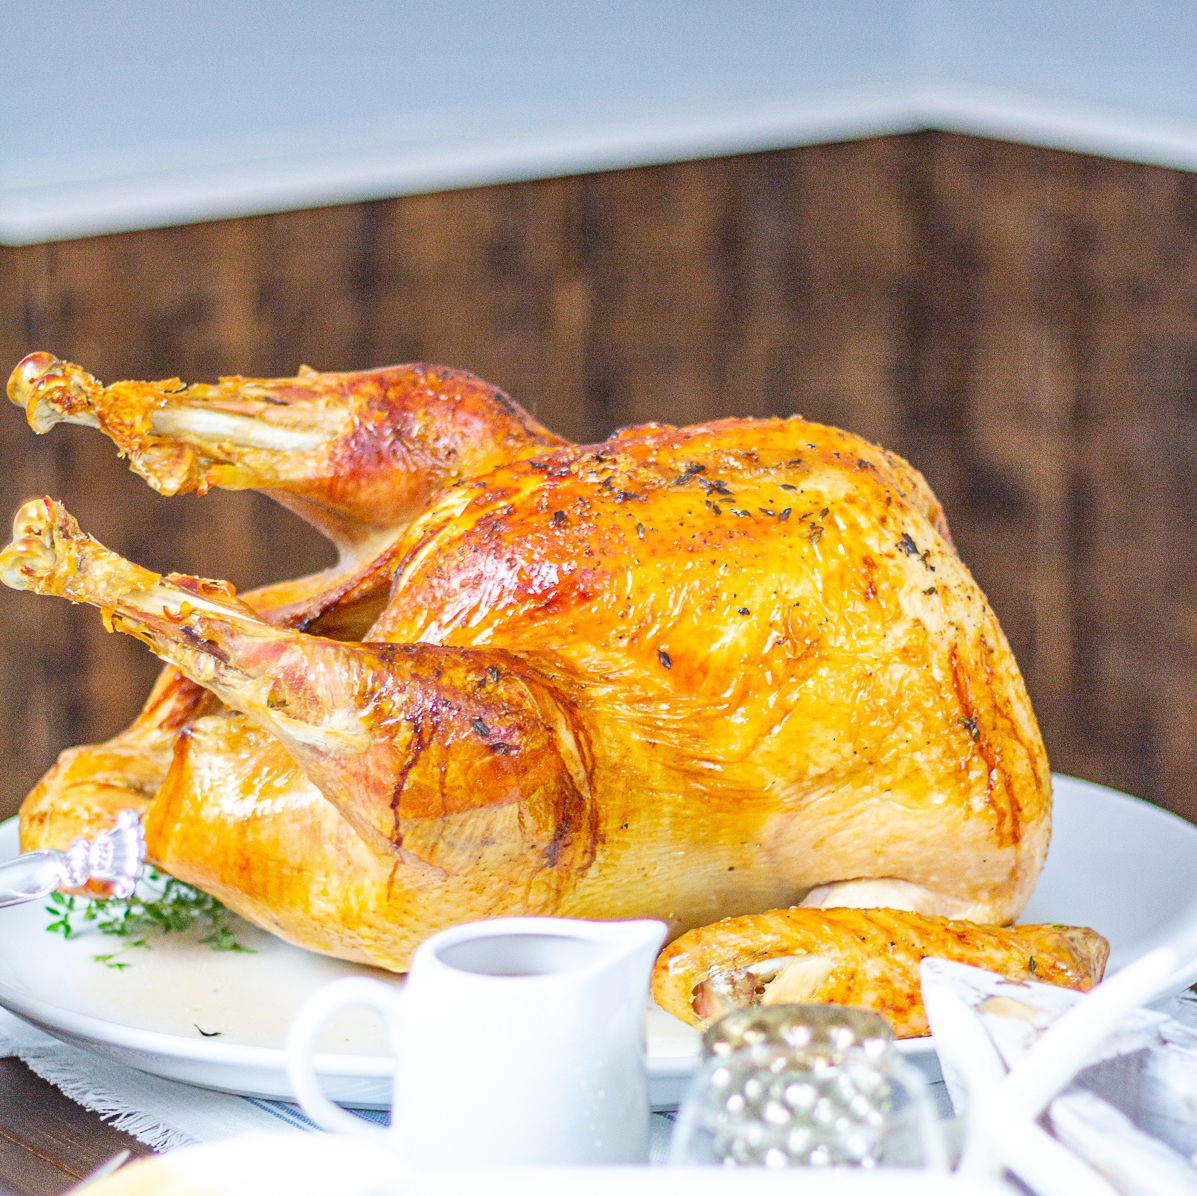 How to Cook a Turkey | Learn how to roast a Thankgiving Turkey